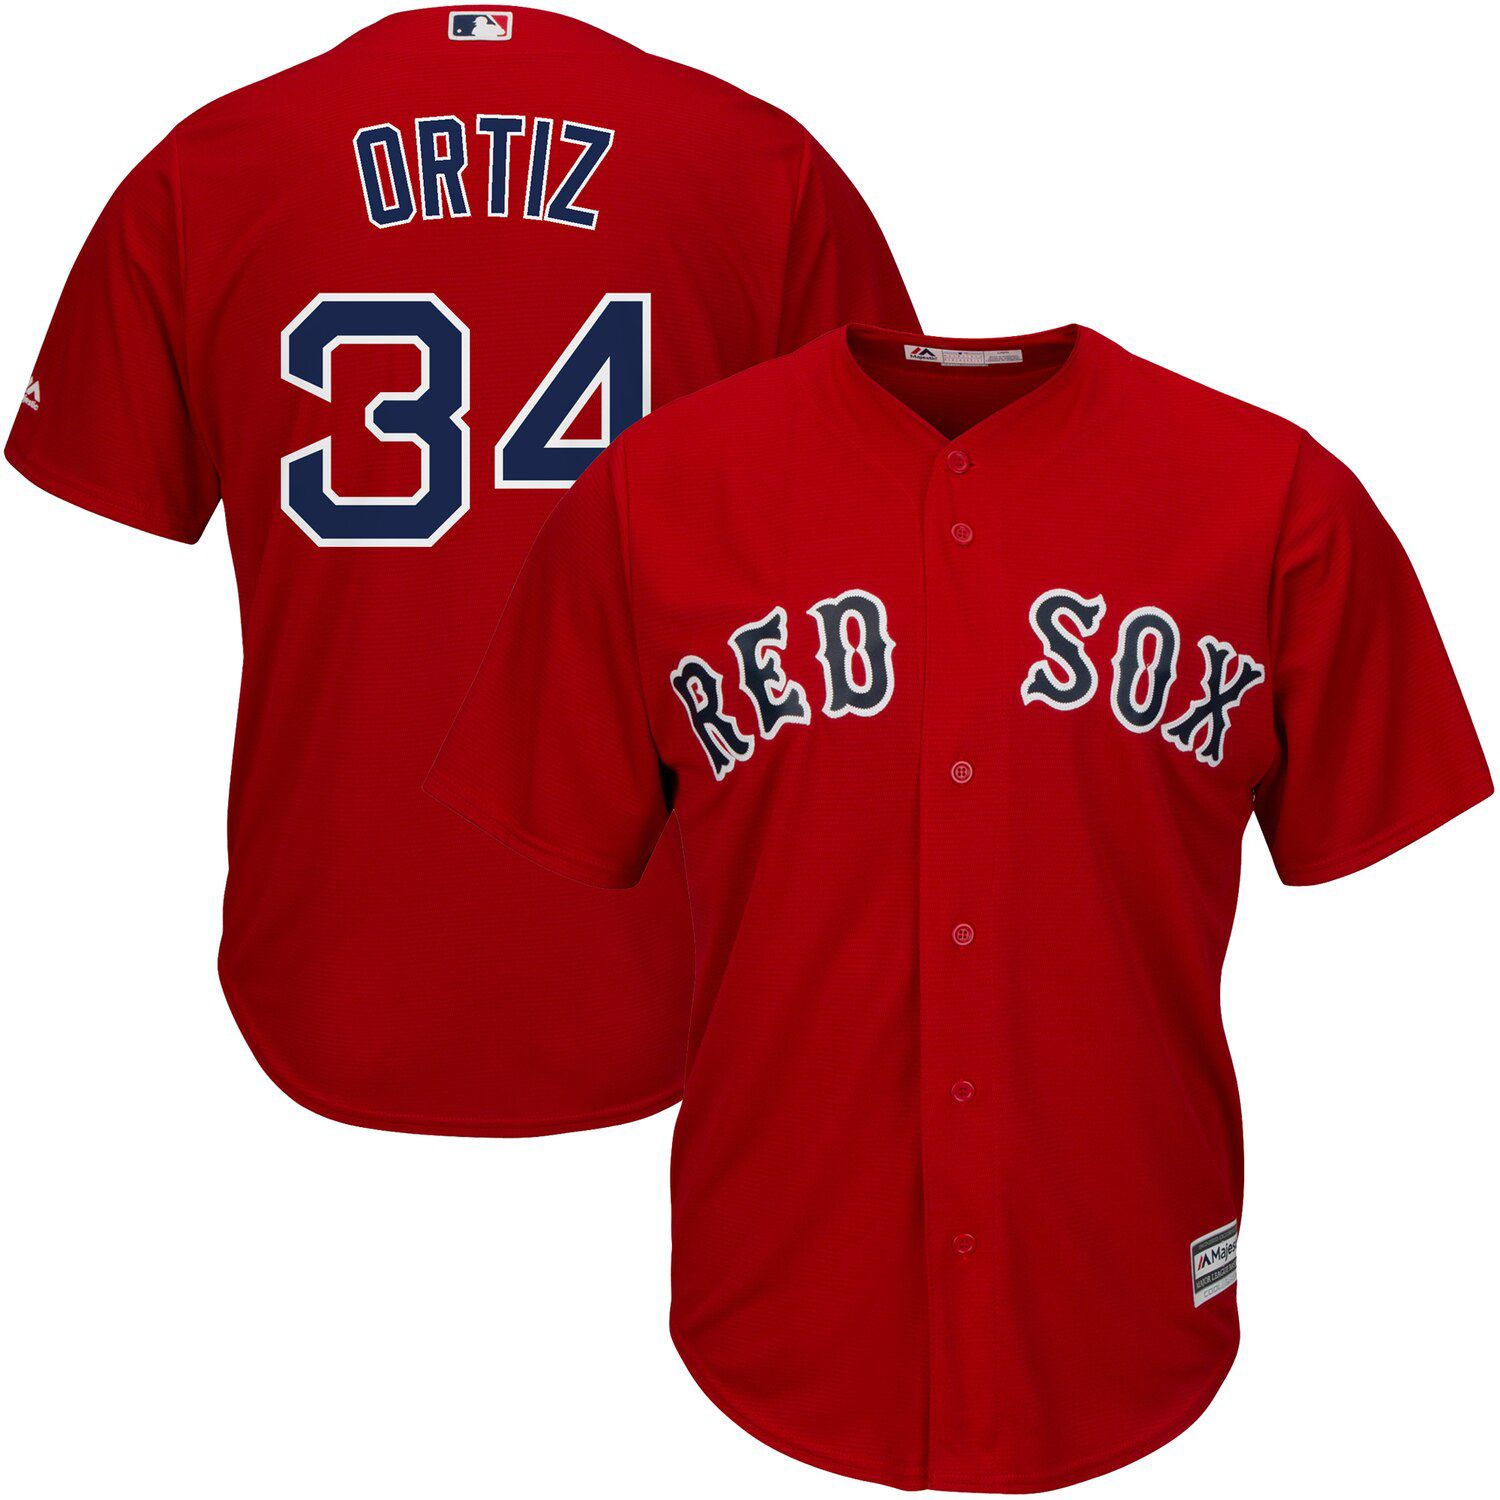 red sox jersey ortiz